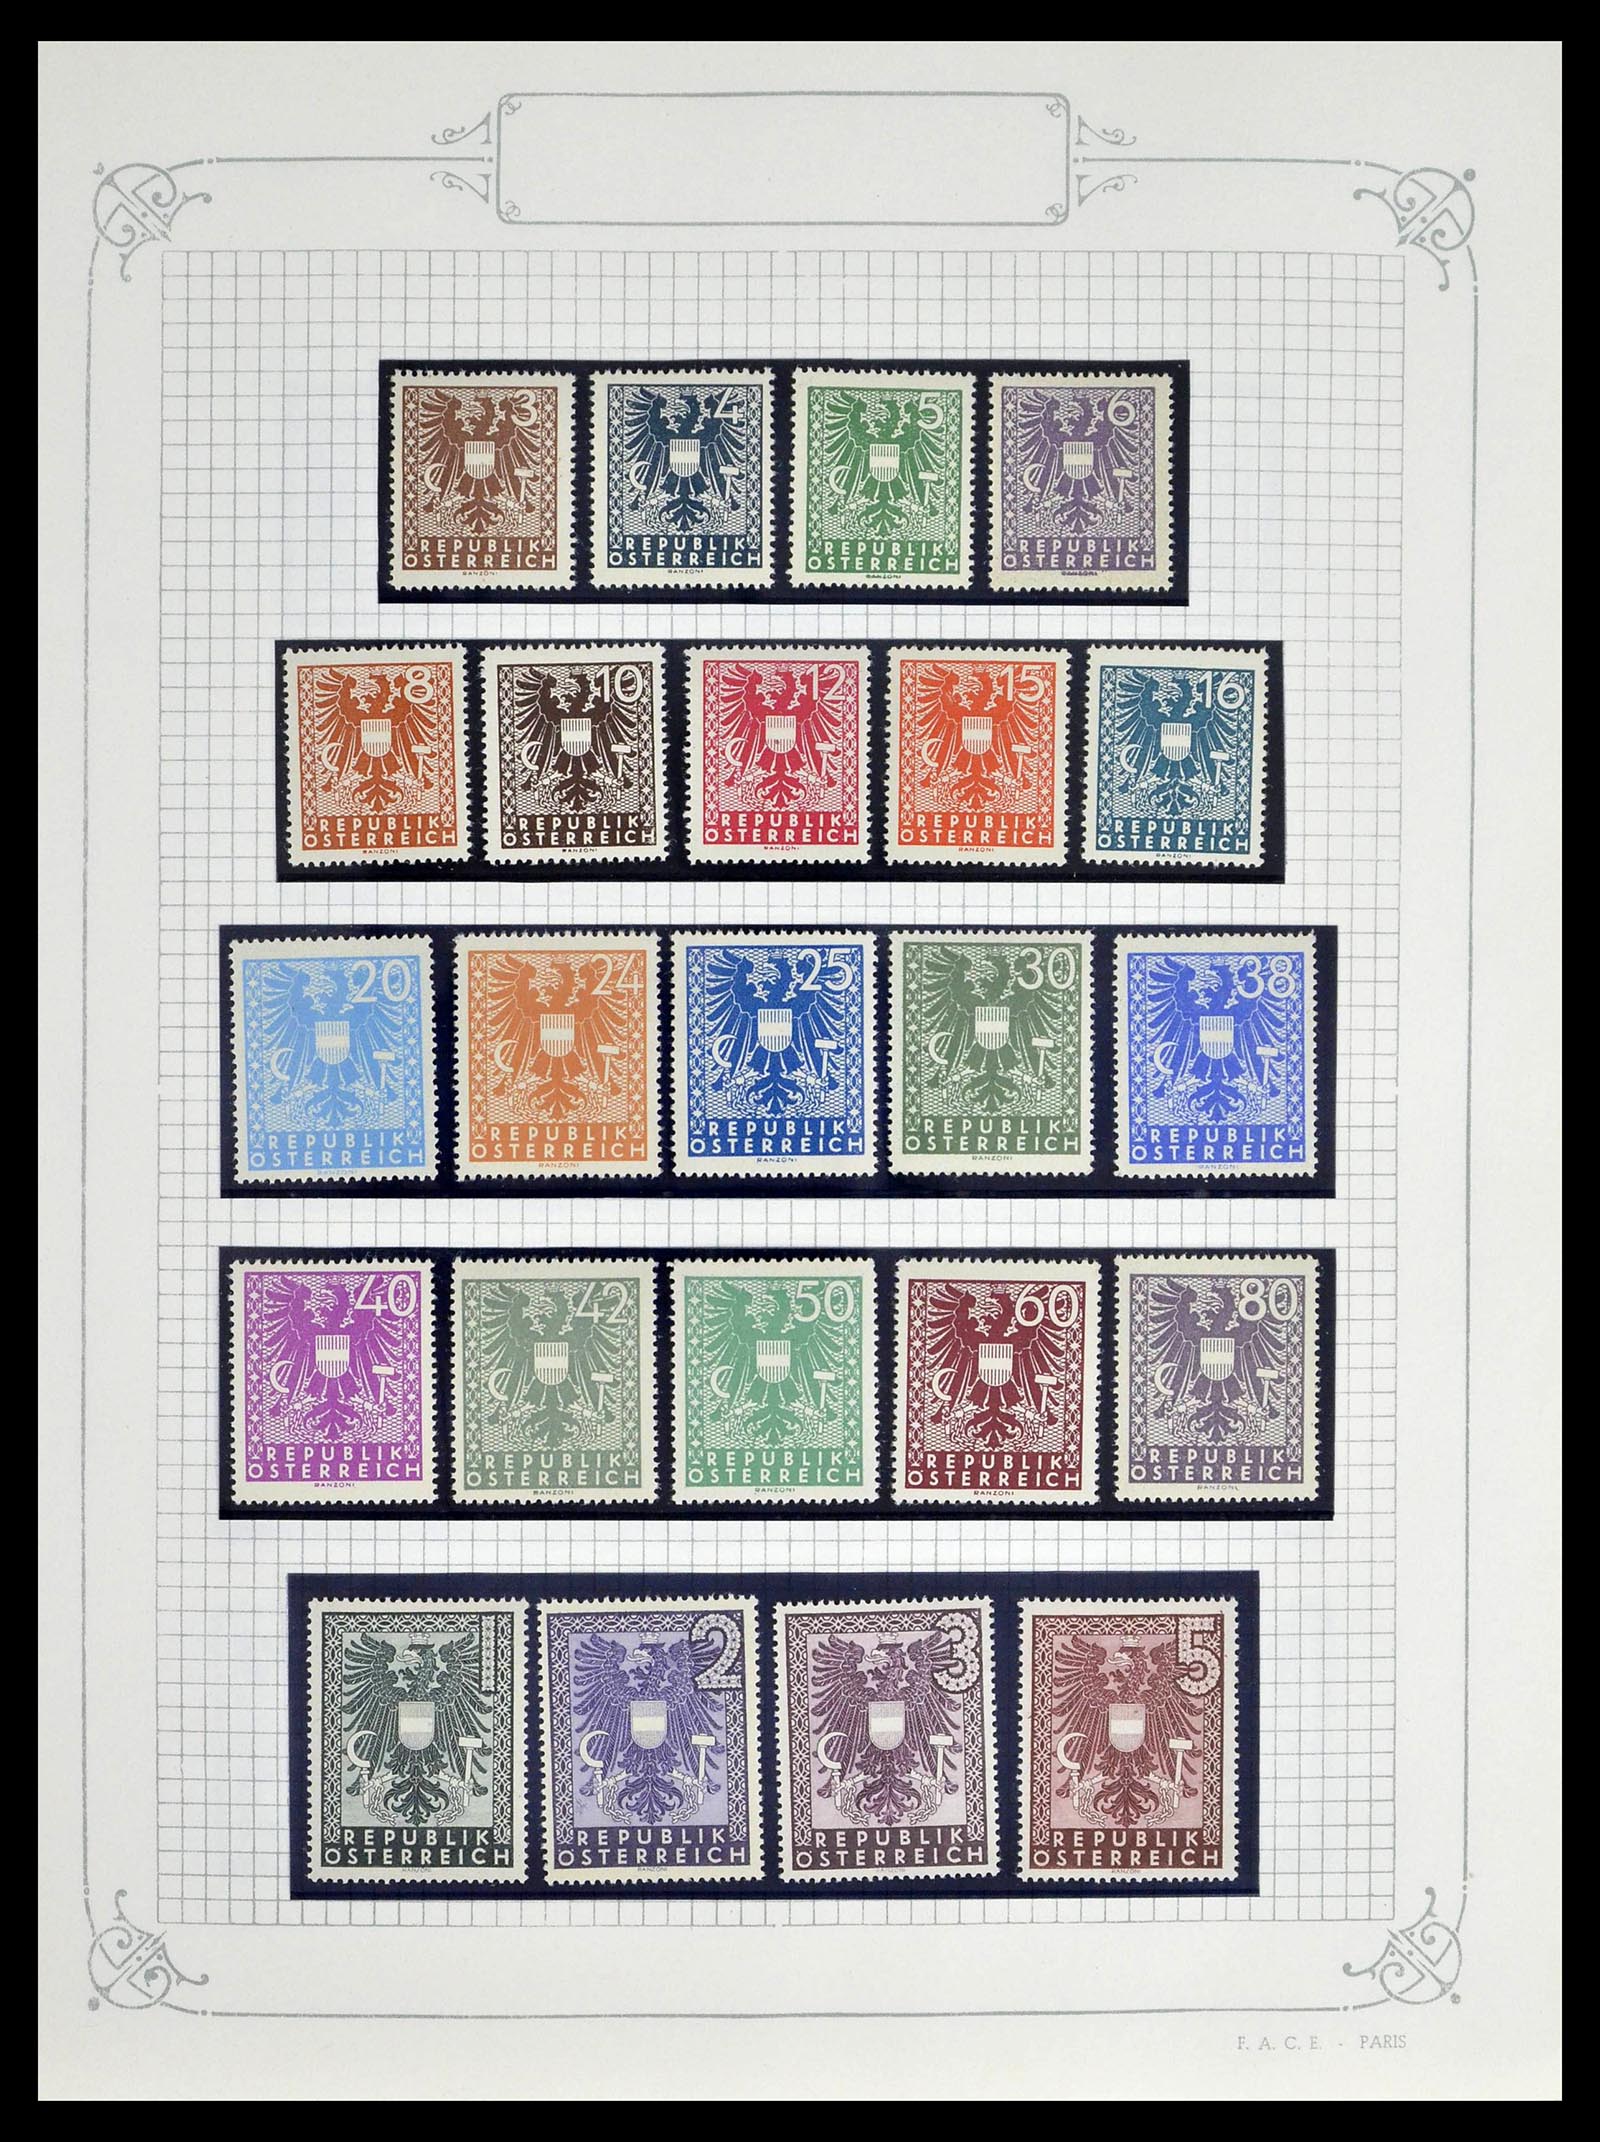 39276 0038 - Stamp collection 39276 Austria and territories 1850-1979.